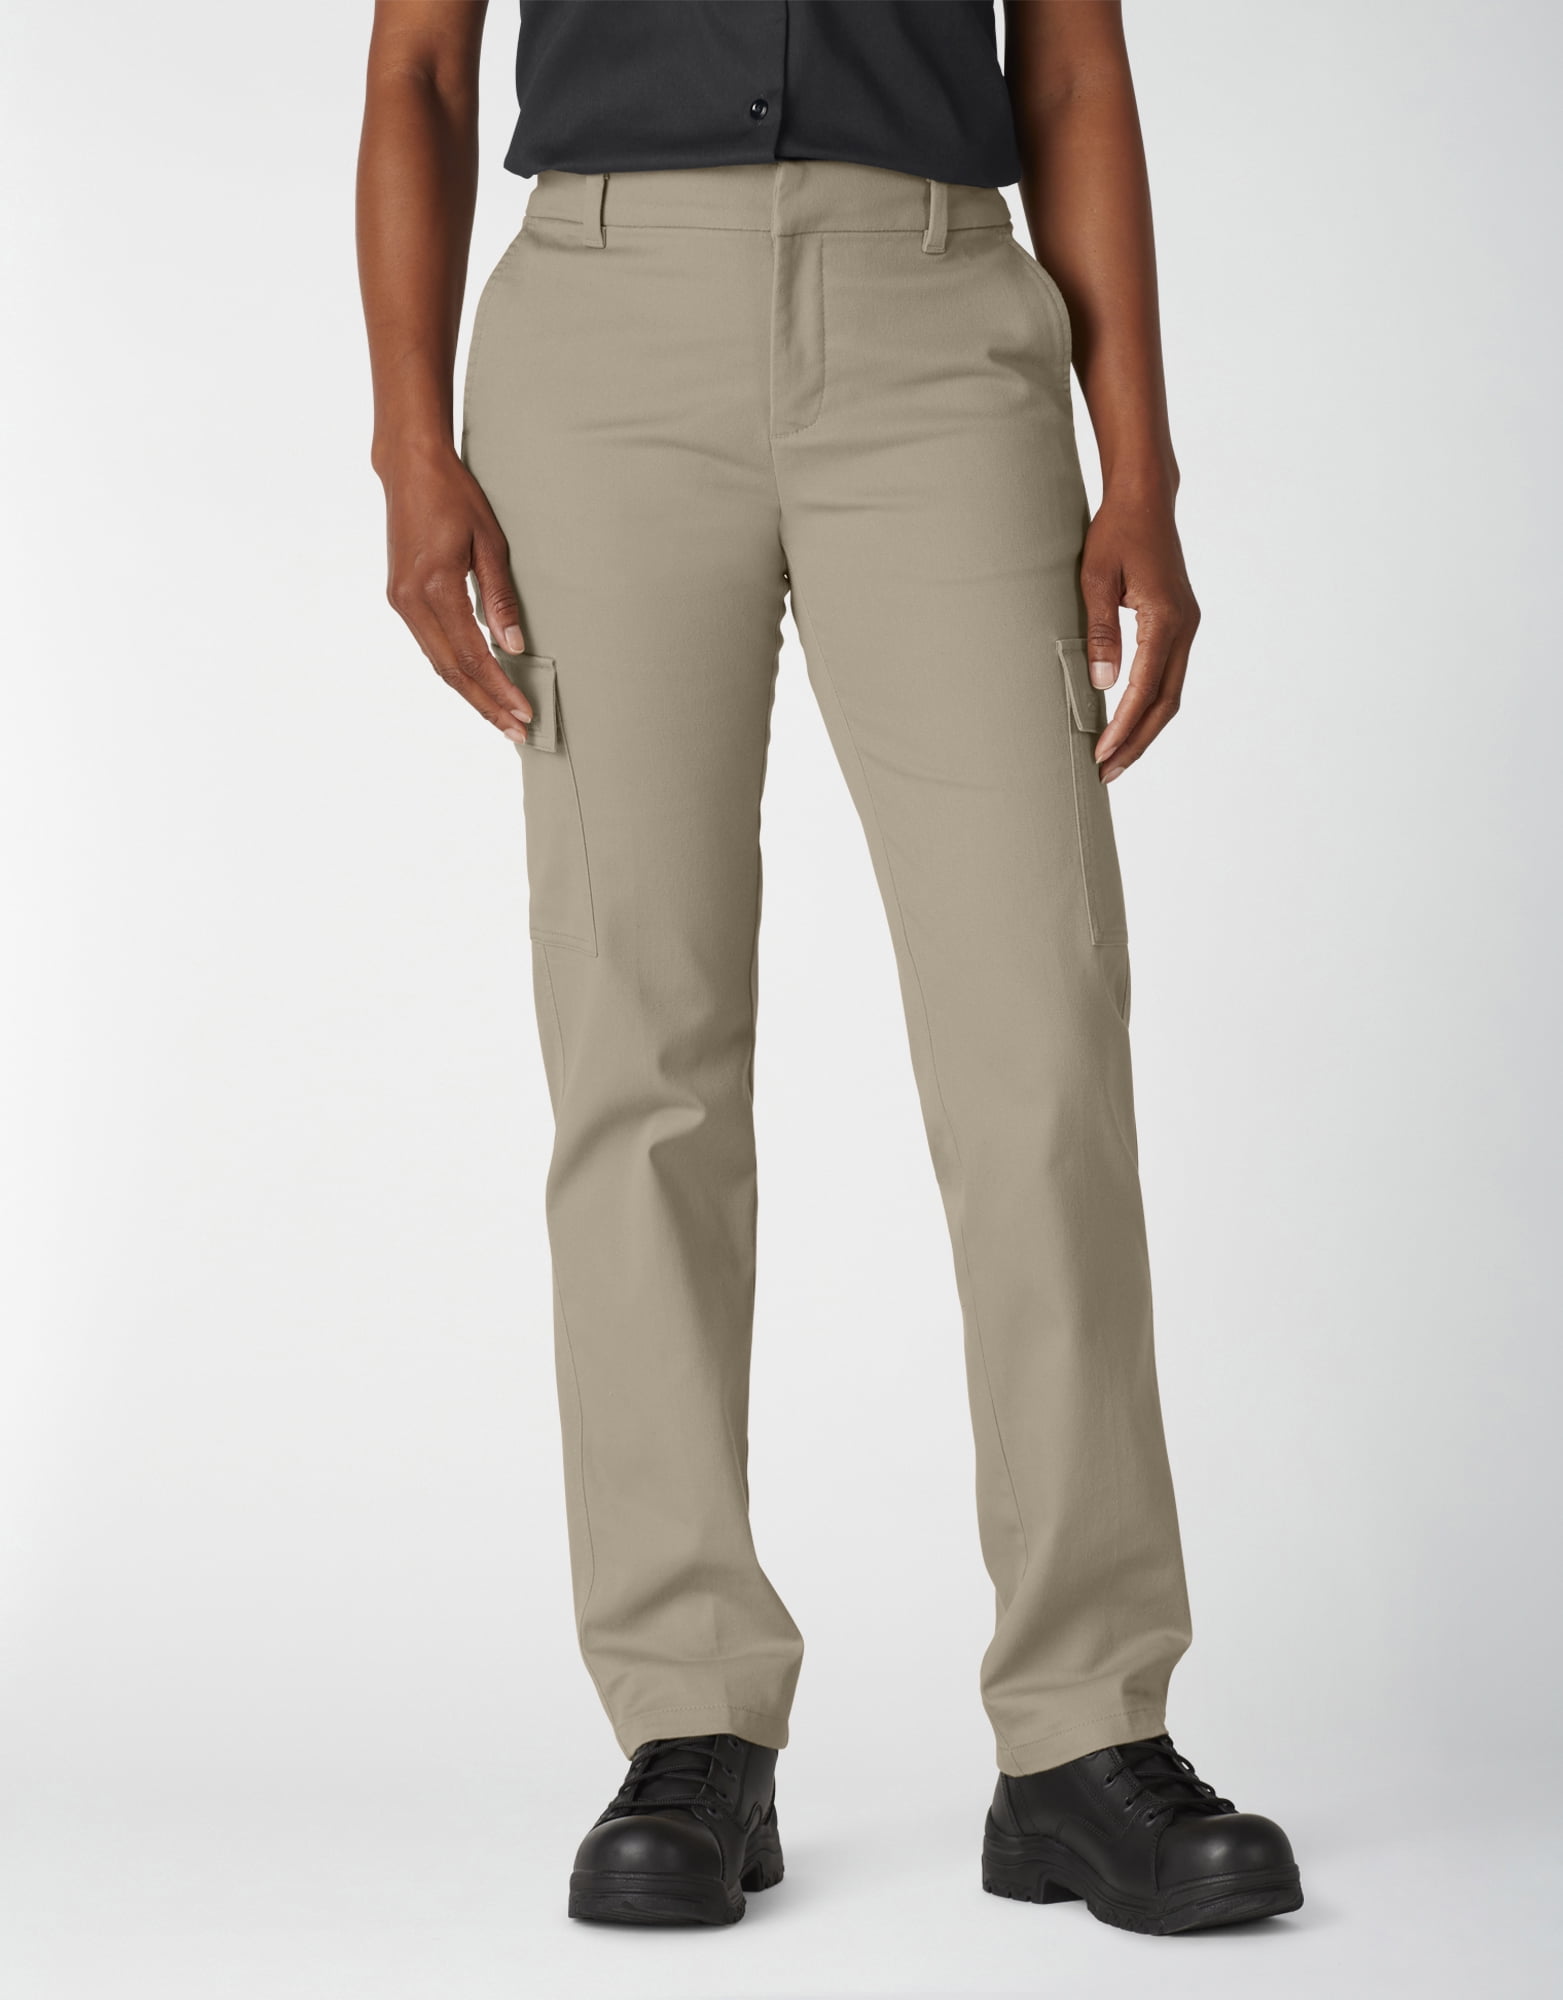 Genuine Dickies Relaxed Fit Straight-Leg Cargo Pant (Women's), 1